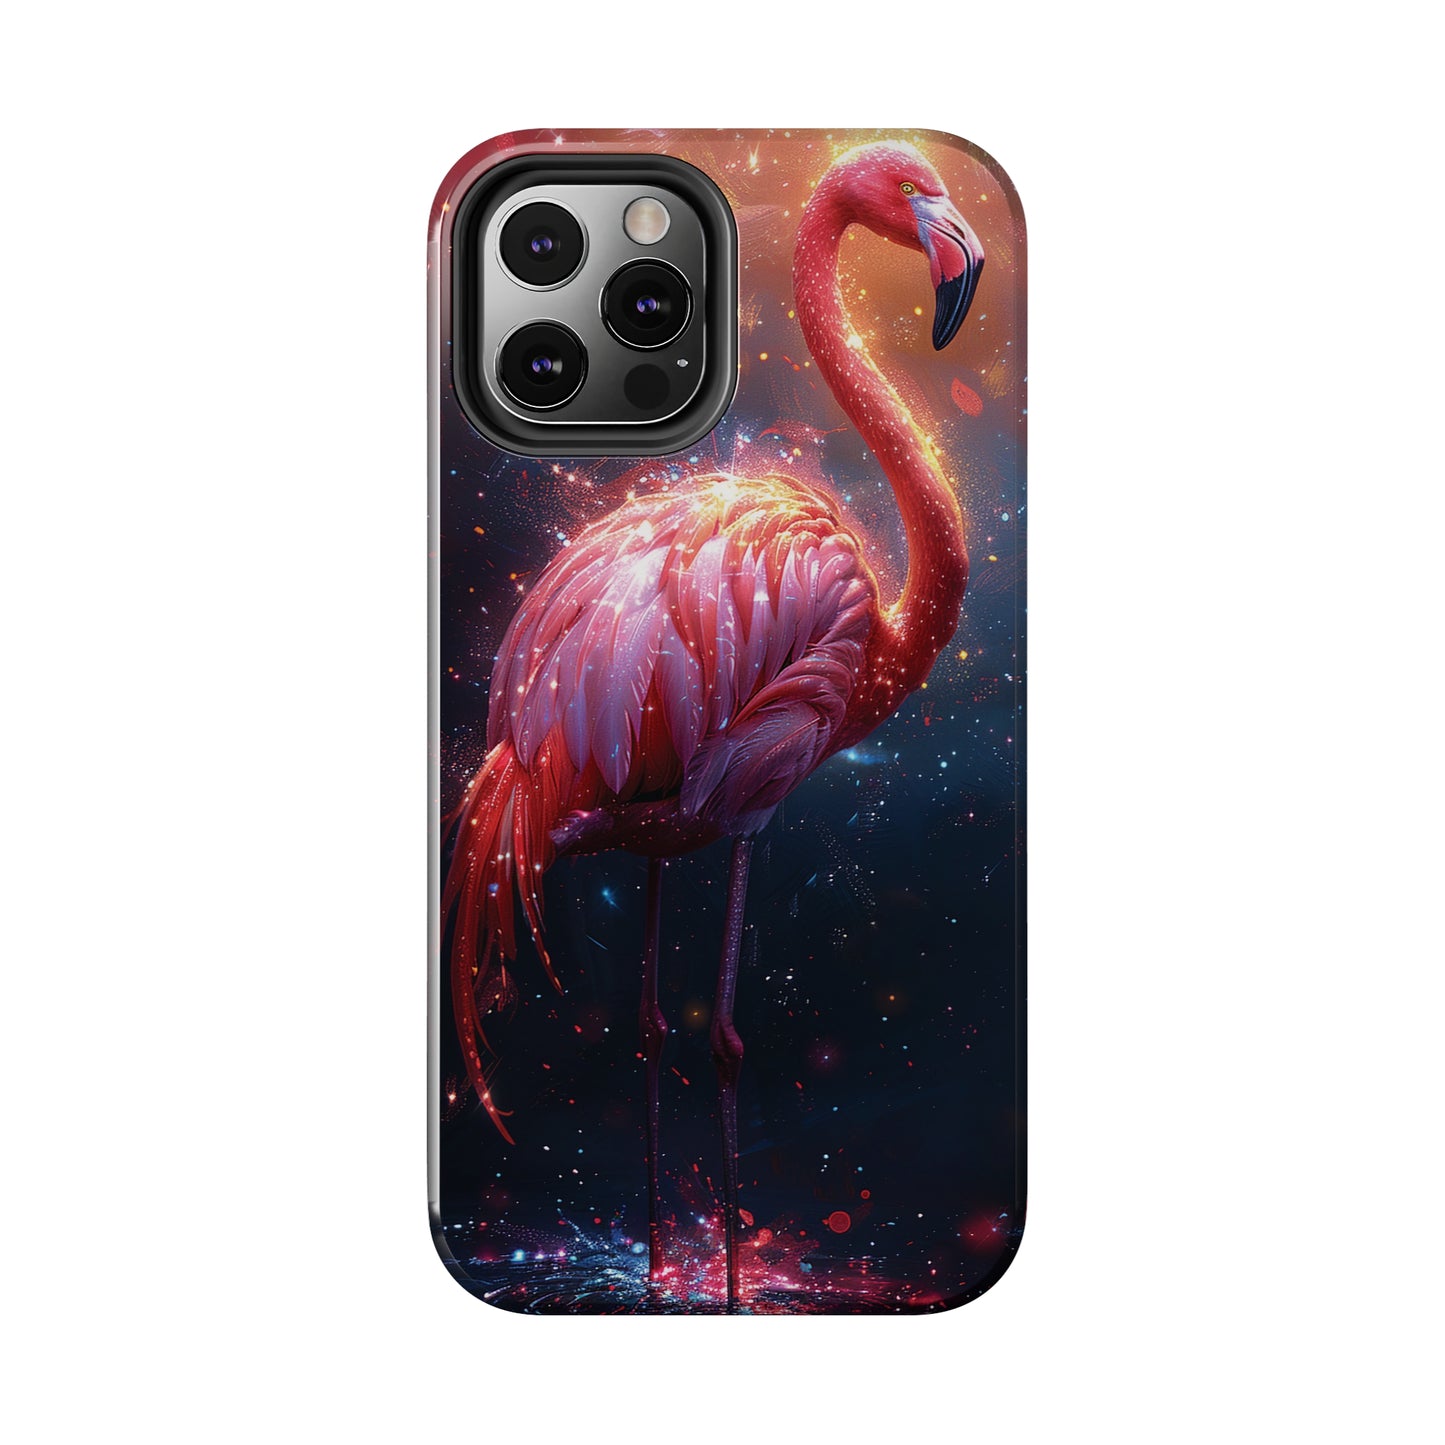 Fantasy Flamingo iPhone Case, Colorful Bird Art Protective Phone Cover, Unique Animal Design, Durable Phone Accessory Gift, Chic Artsy Protective Cover, Protective Case for iPhone Models, Tough iPhone Case